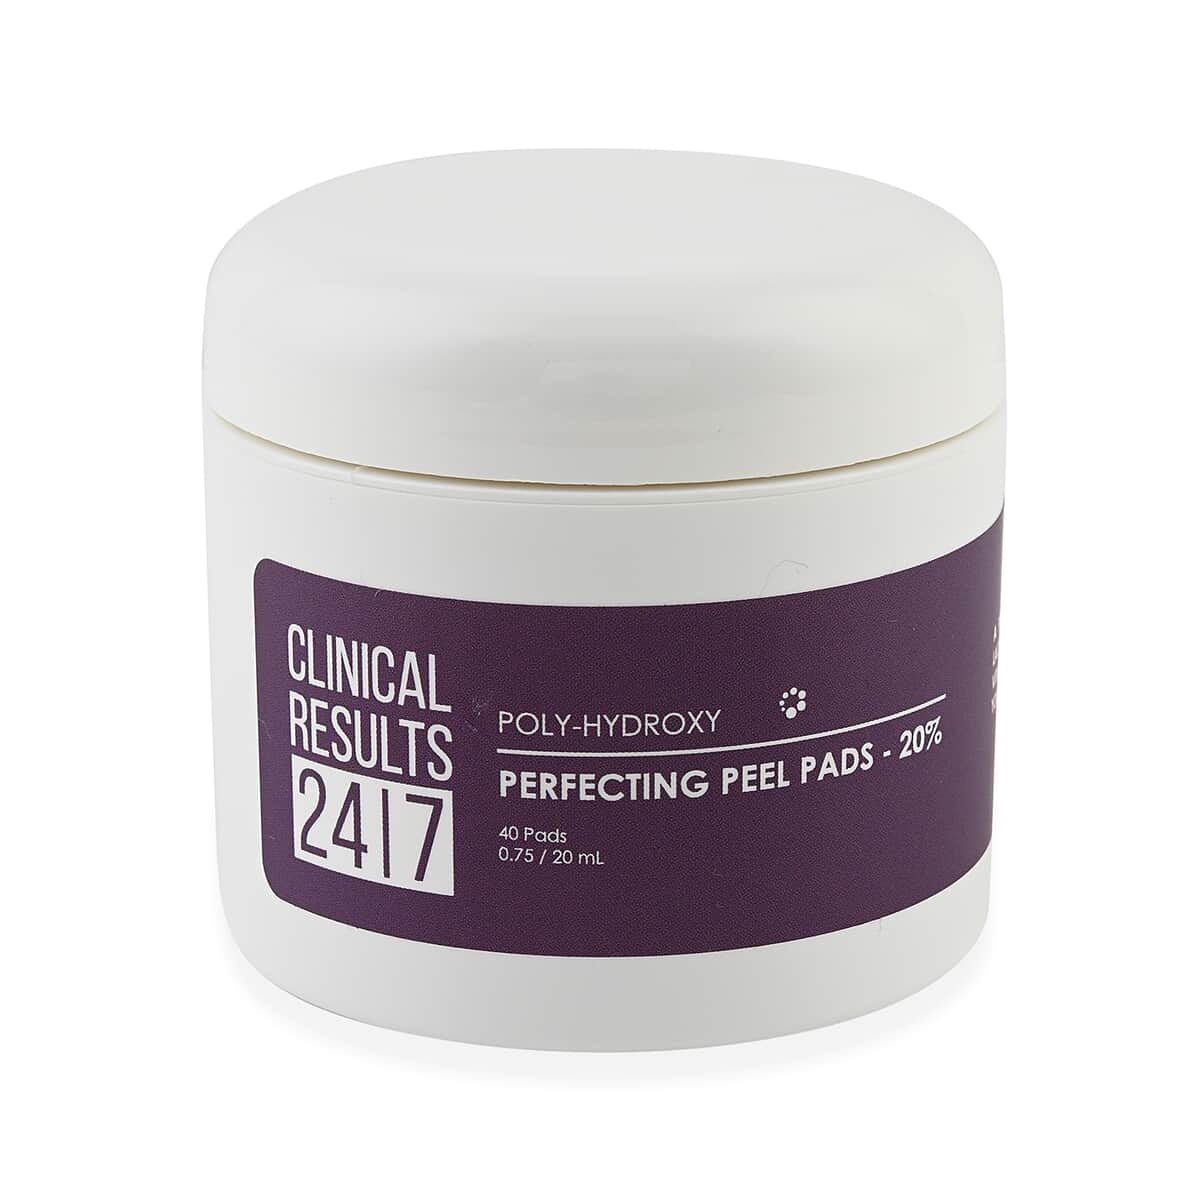 Clinical Results 24.7 Poly-Hydroxy Perfecting Peel Pads (40 Pads) image number 0